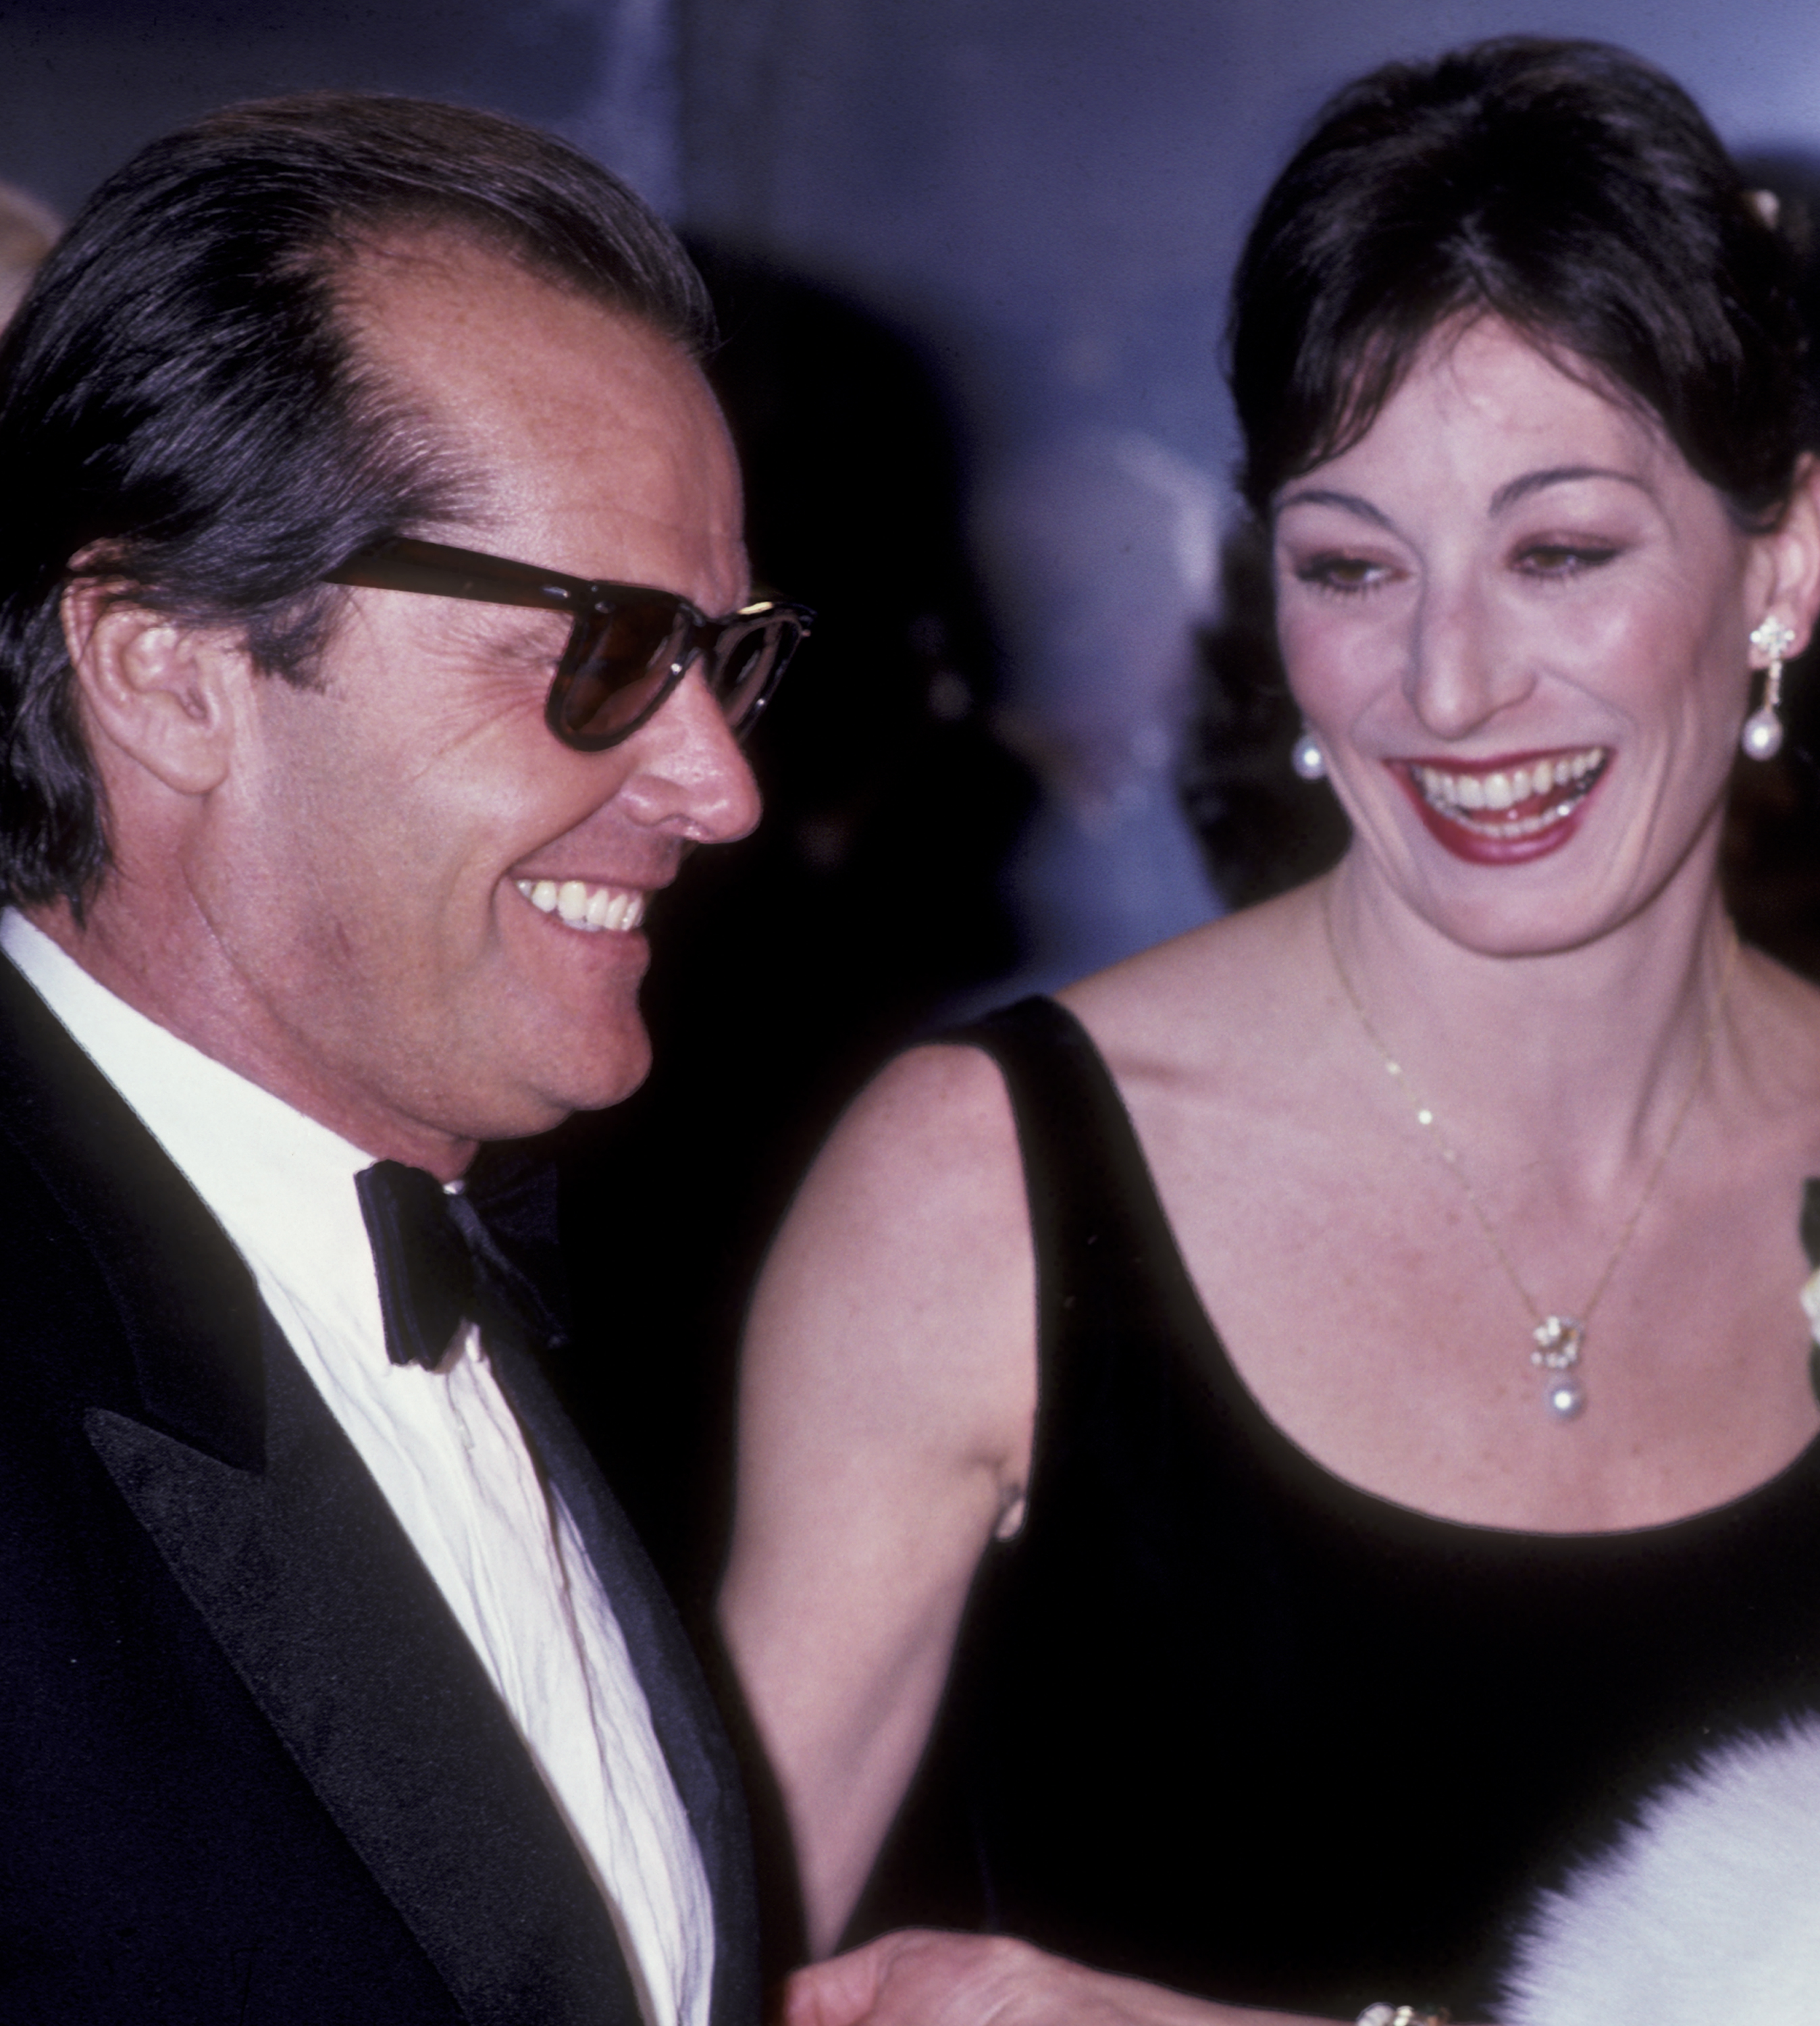 Actor Jack Nicholson and Anjelica Huston attend the Tribute Gala Honoring Jack Nicholson on March 3, 1983 at the Beverly Hilton Hotel in Beverly Hills, California.  |  Source: Getty Images